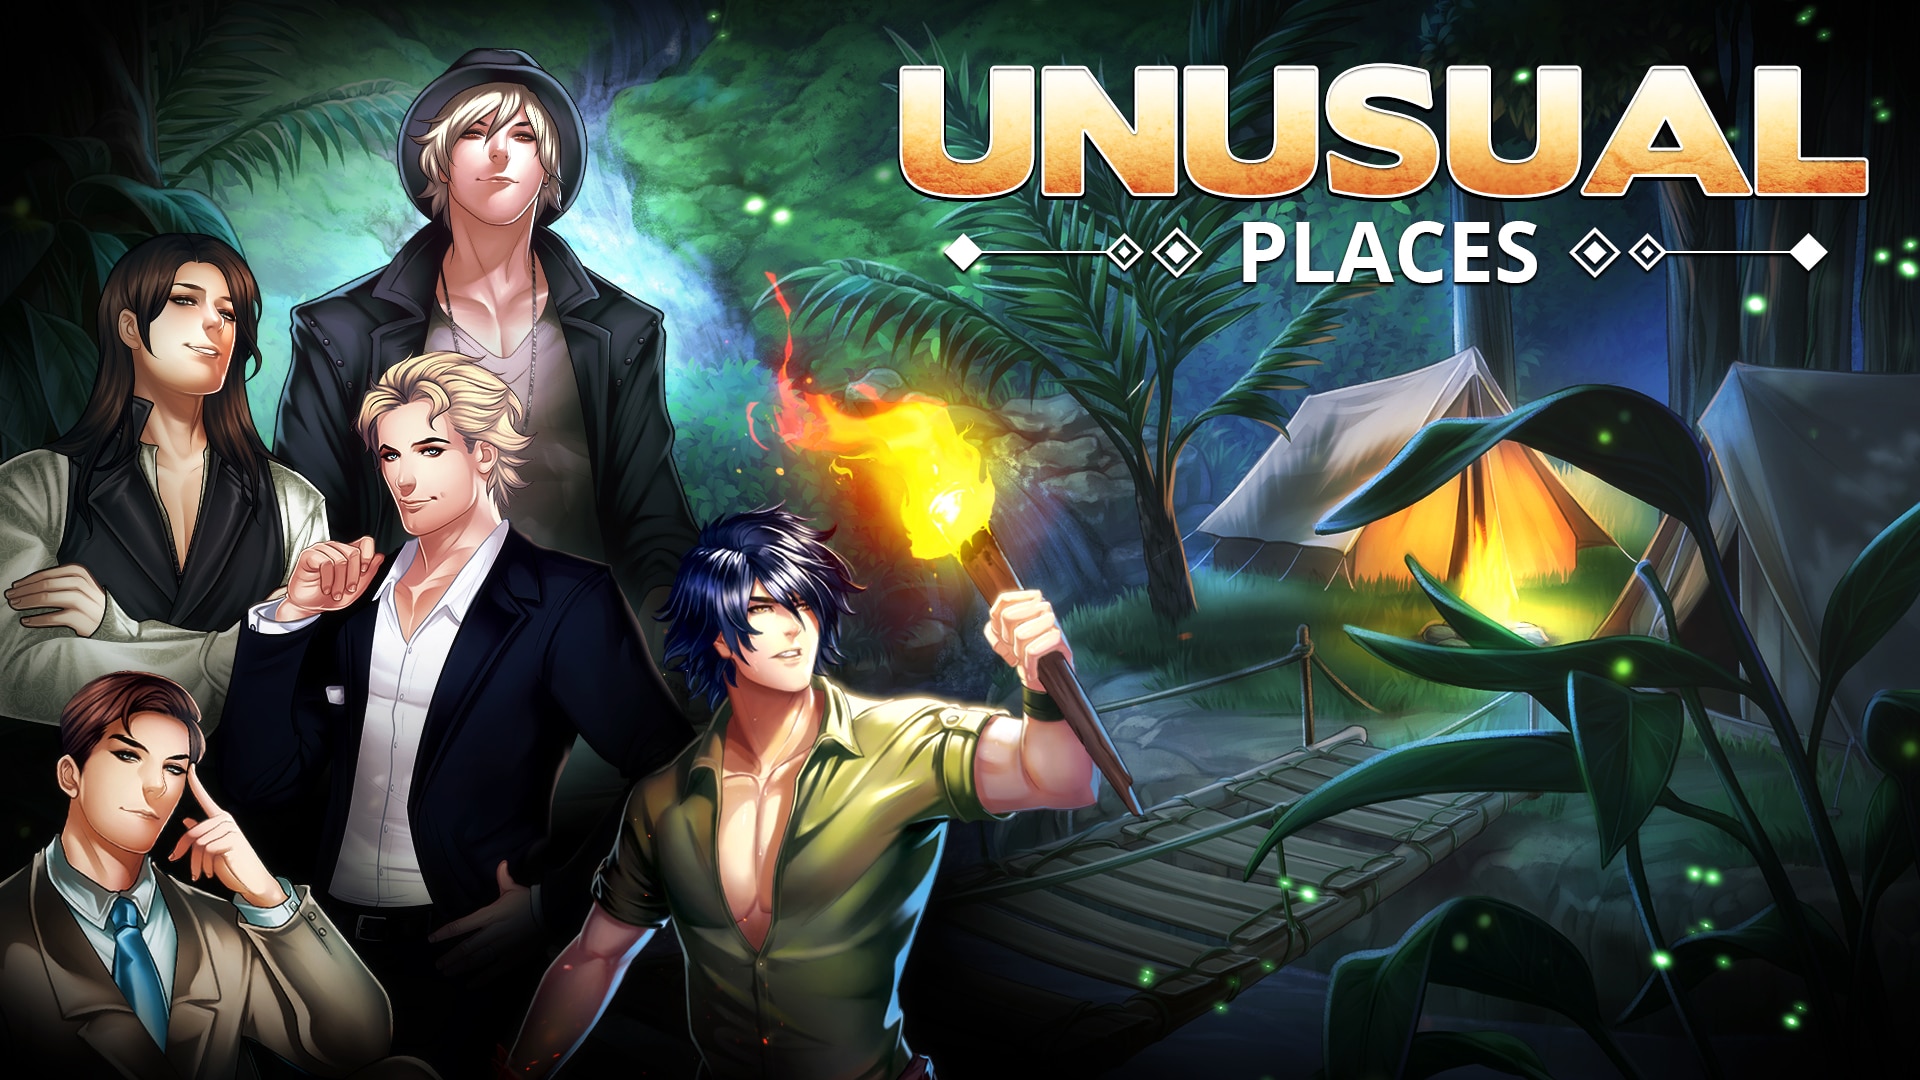 Extra Event "Unusual Places"